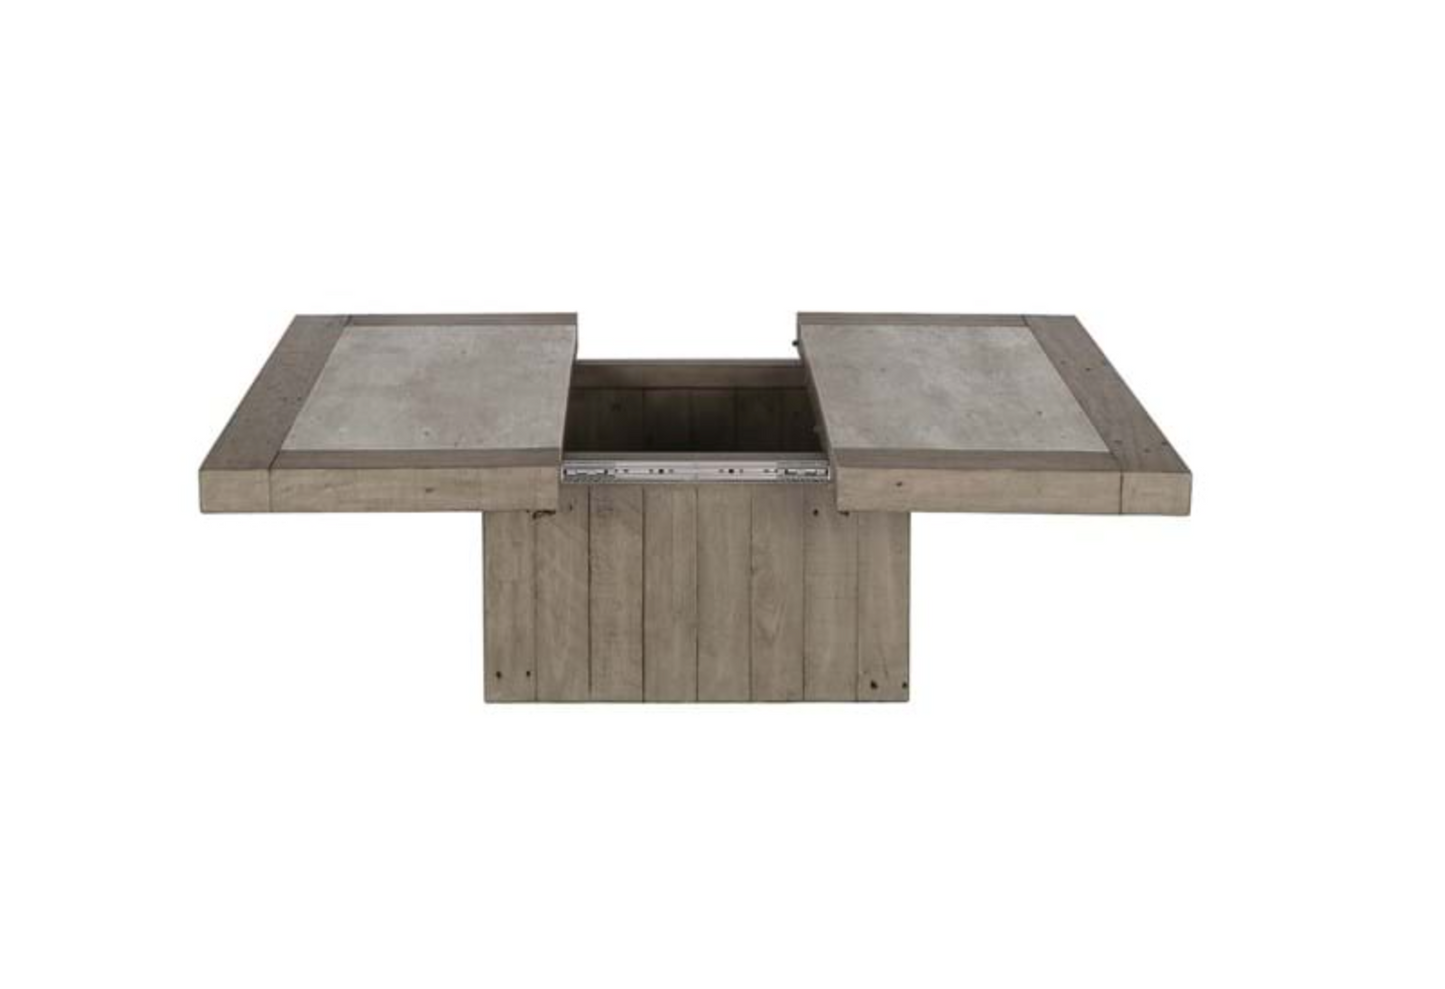 Newport Coffee Table with Storage